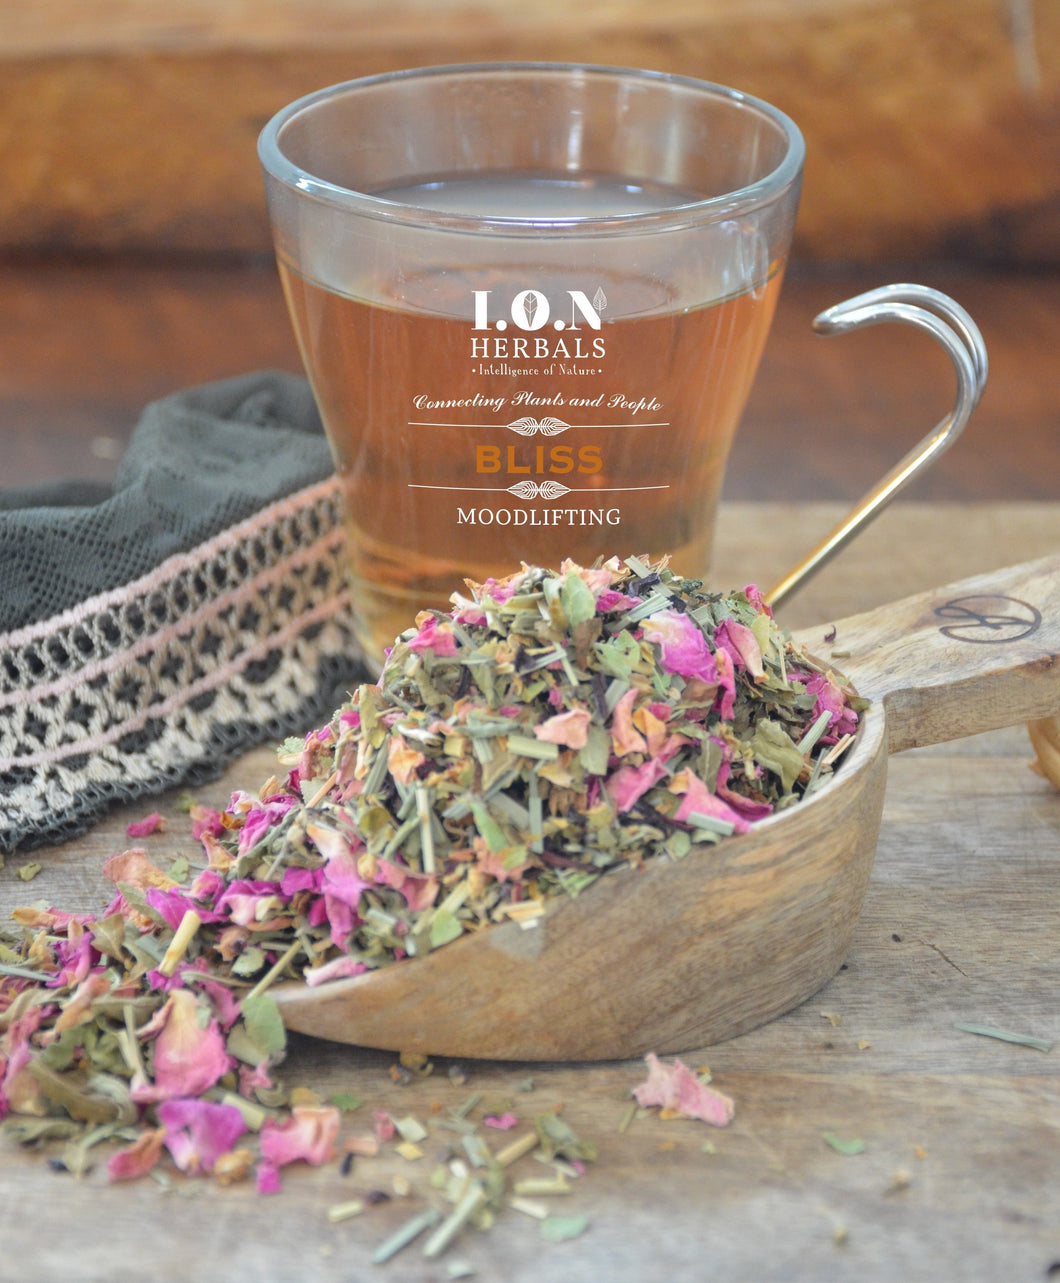 BLISS in a cup.  This is a beautiful infusion of herbs to open the heart and lift the mood; simply the aroma can carry one to bliss.